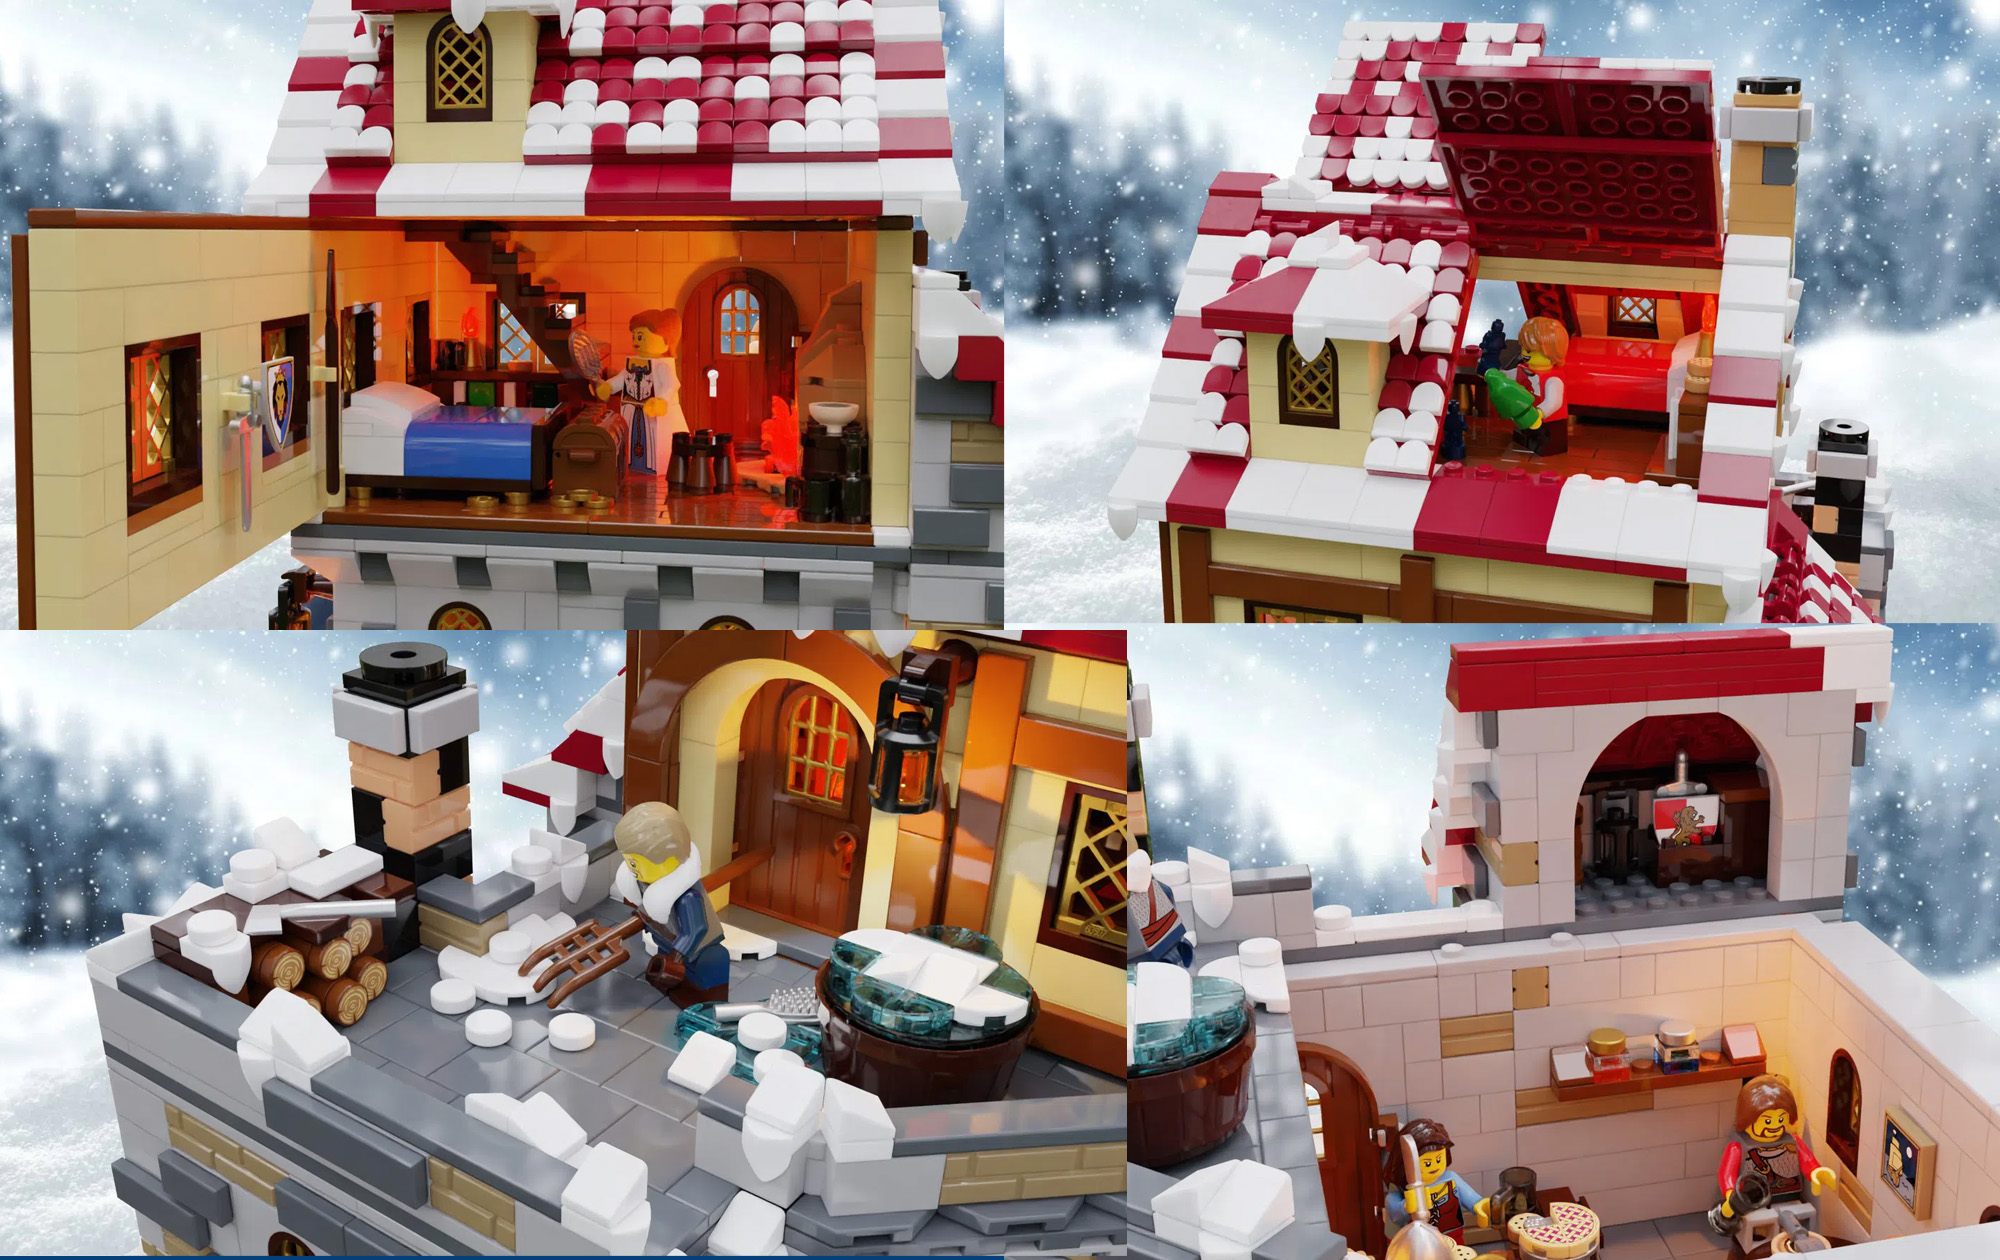 THE TAVERN UNDER THE SNOW Achieves 10K Support on LEGO IDEAS